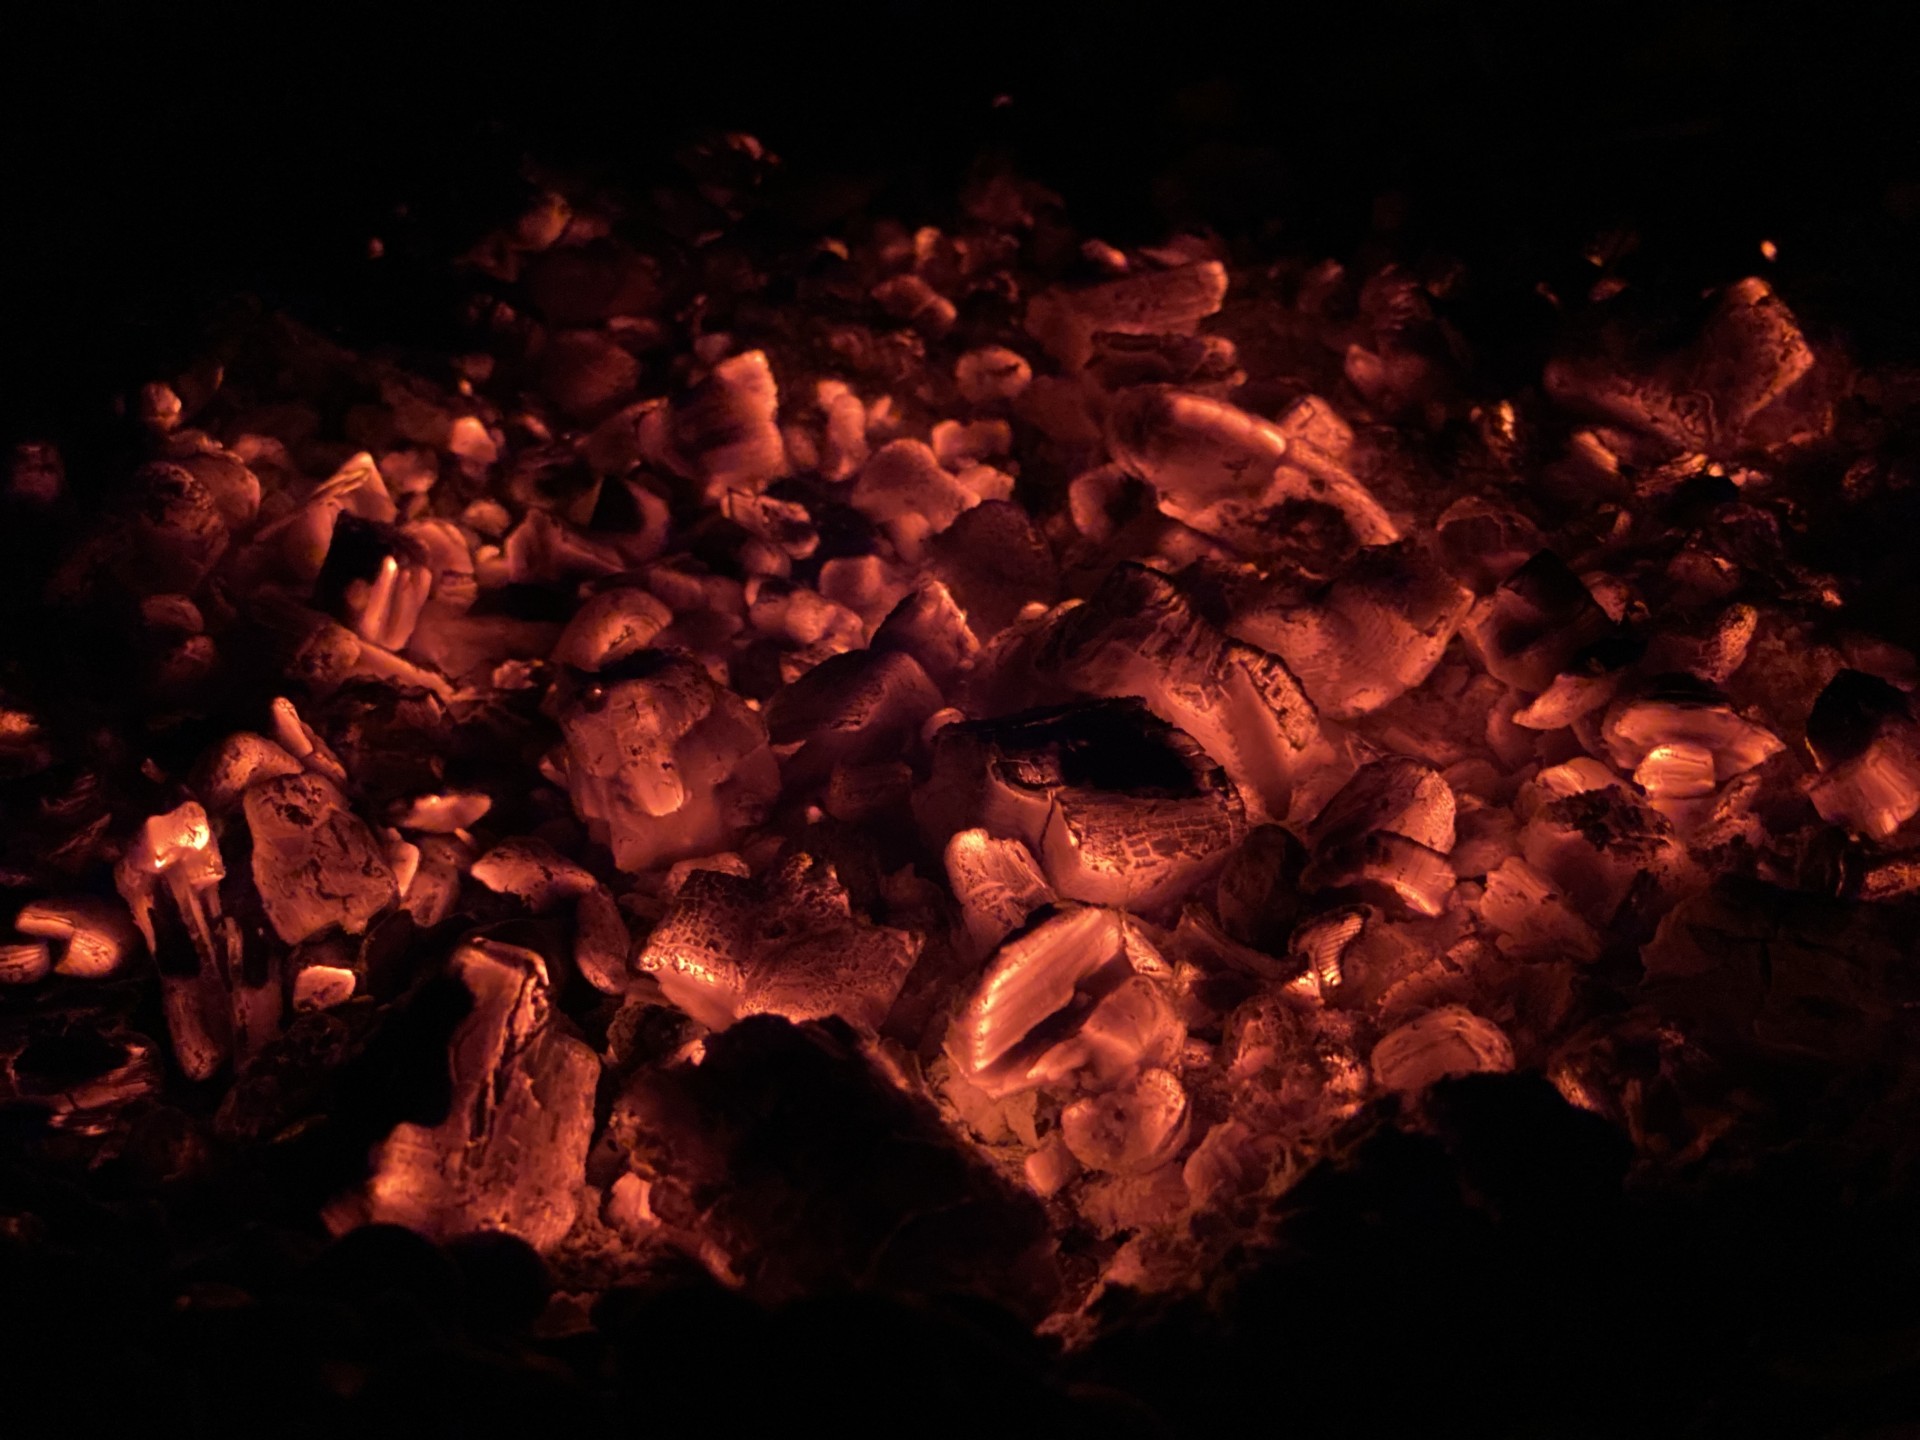 Red hot coals of a fire at night.